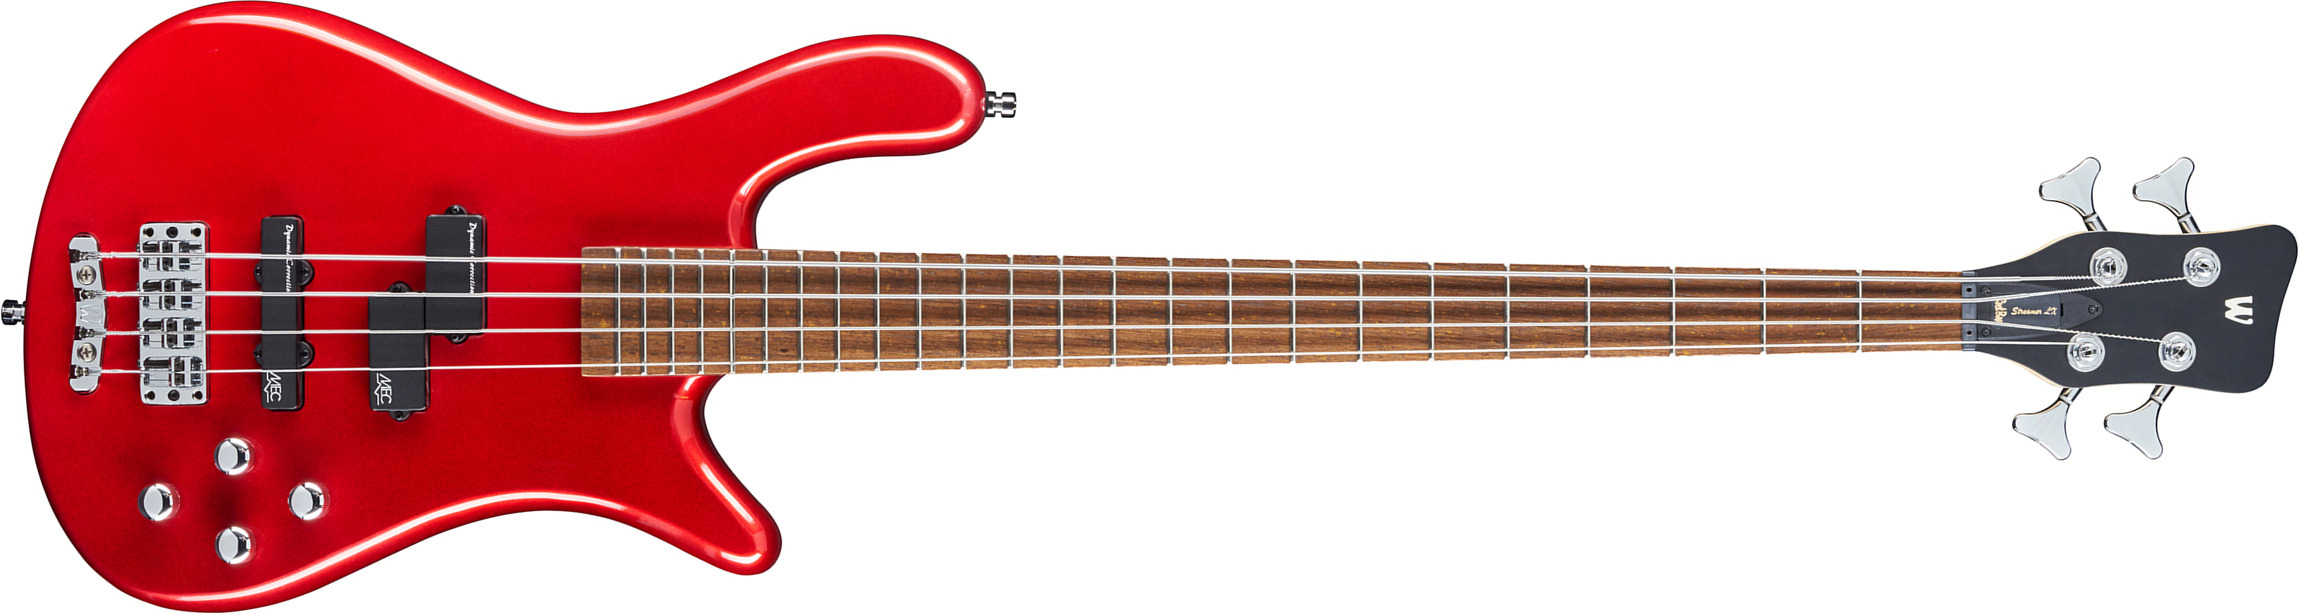 Warwick Streamer Lx4 Rockbass Active Wen - Red Metallic - Solid body electric bass - Main picture